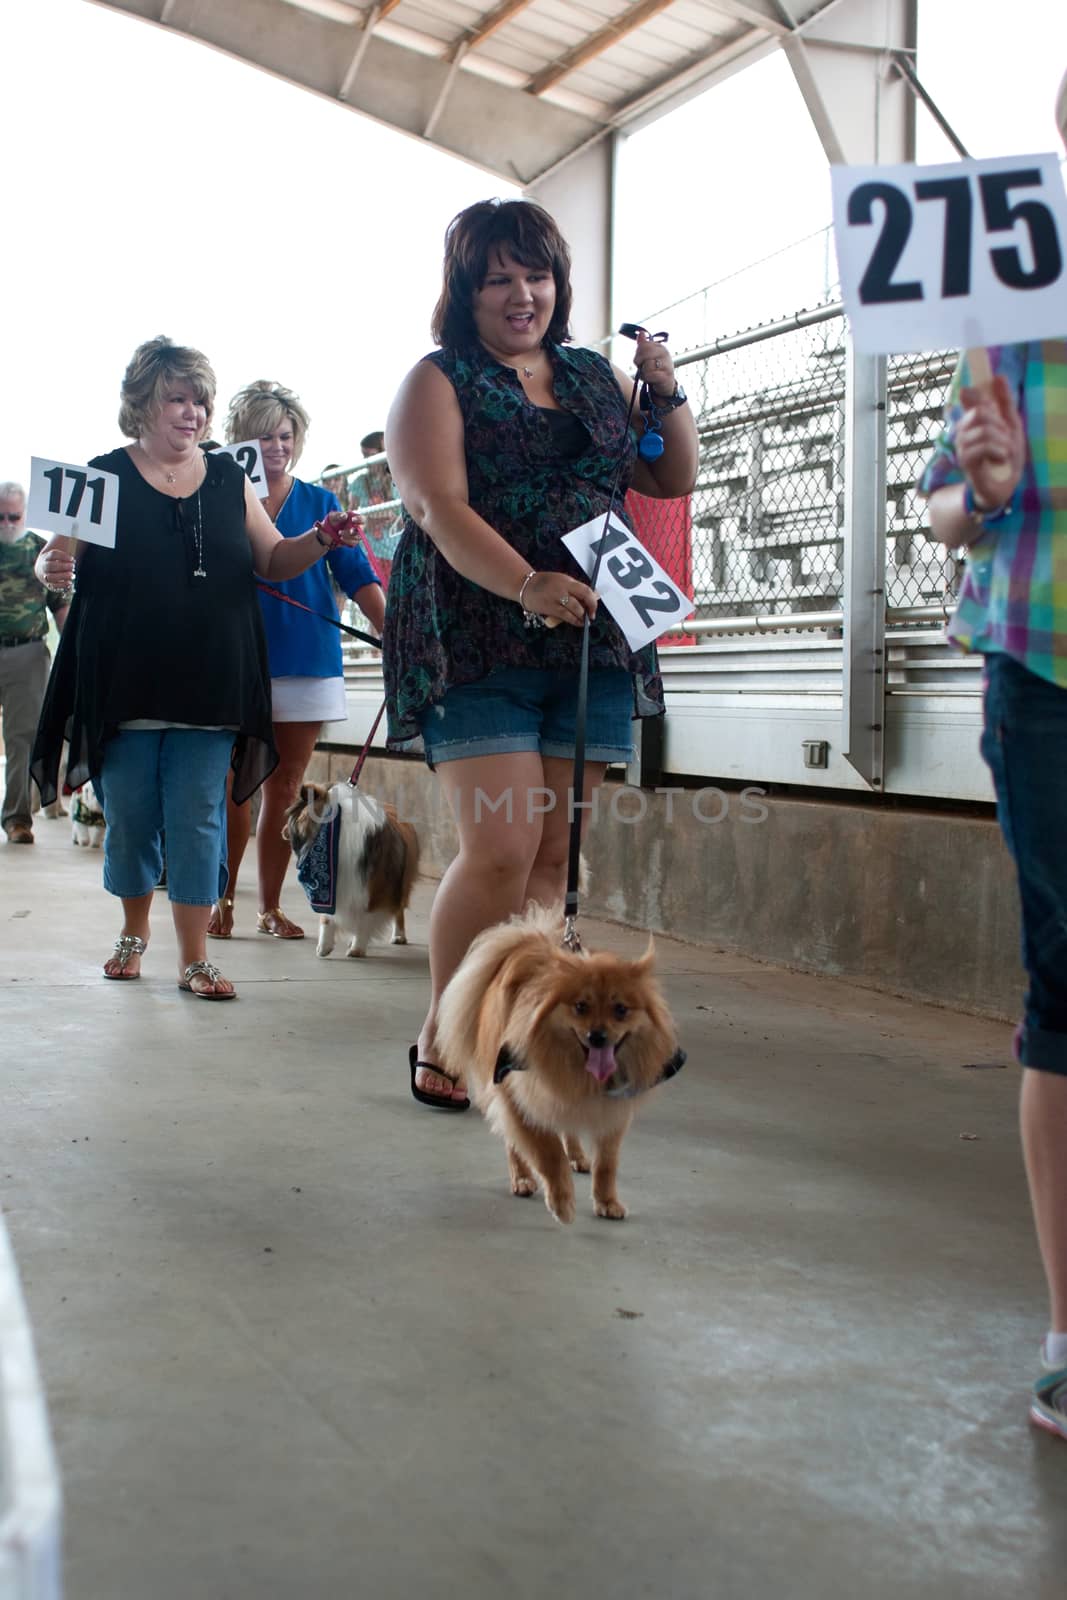 McDonough, GA, USA - May 10, 2014:  Contestants parade their dogs to be voted on at the annual Dog Days of McDonough festival.